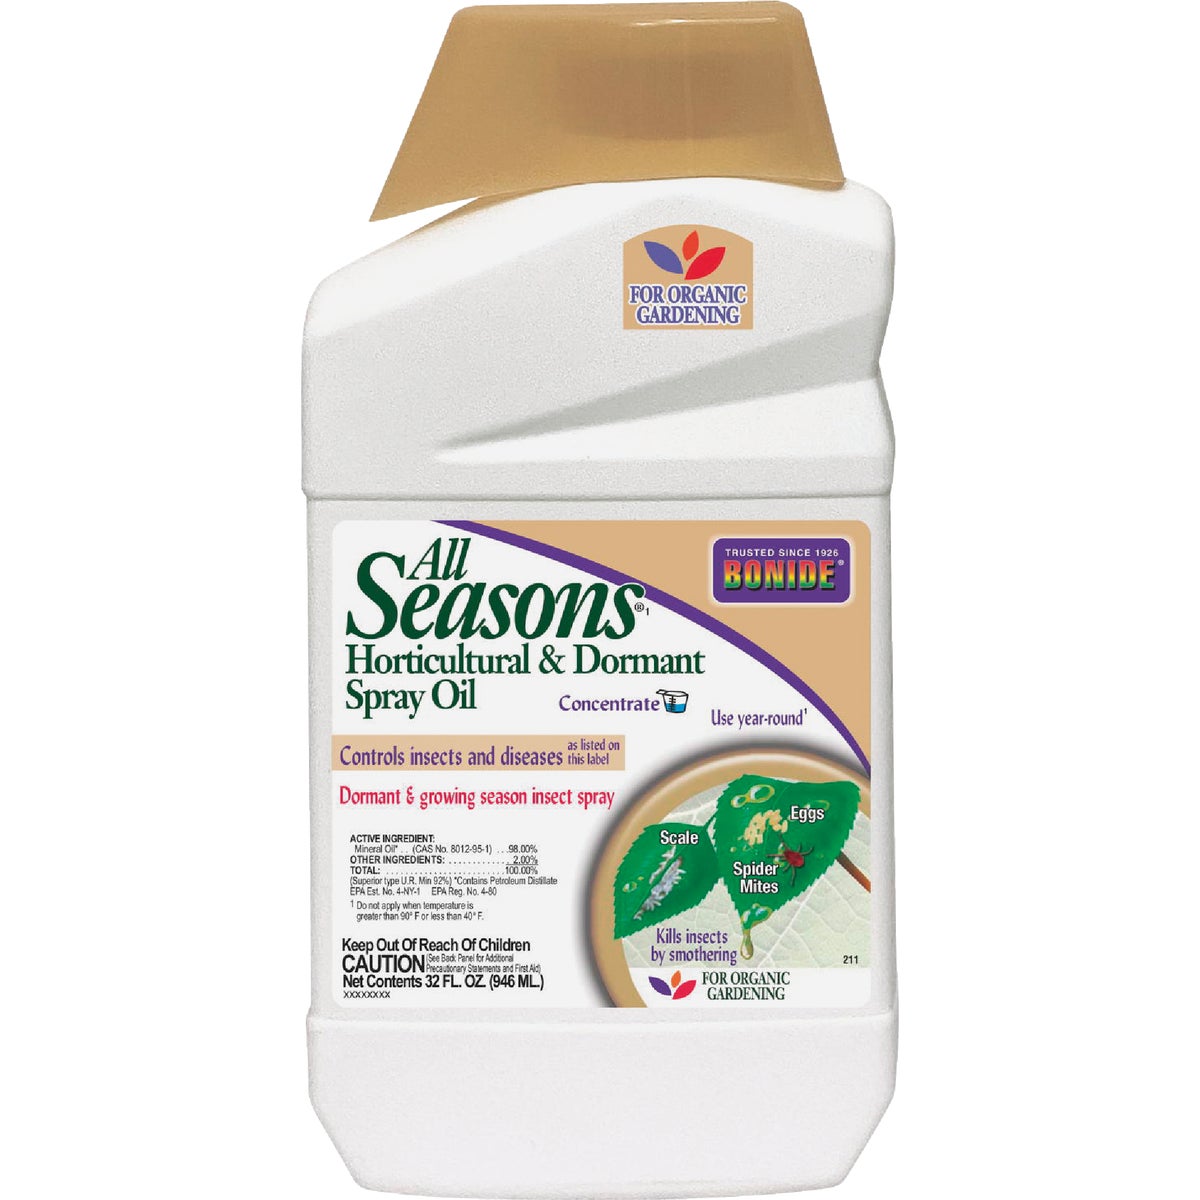 Item 759290, Control insects and diseases in your home garden with All Seasons 